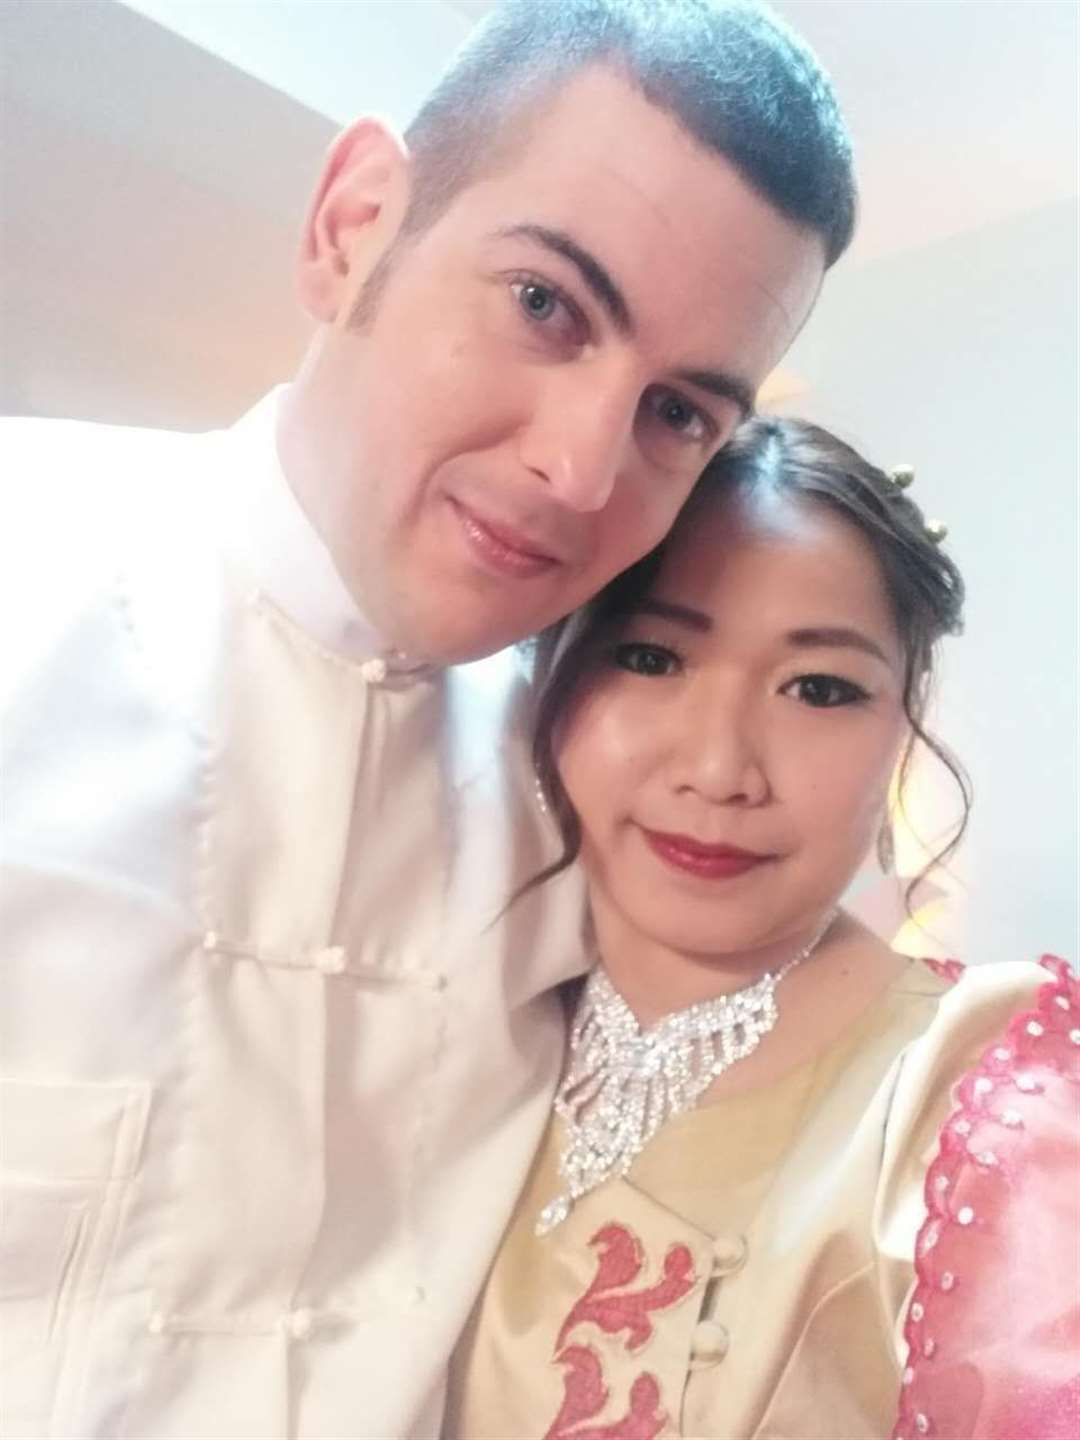 Ramsay and Pan Ei Phyu on their wedding day on February 4, 2018.